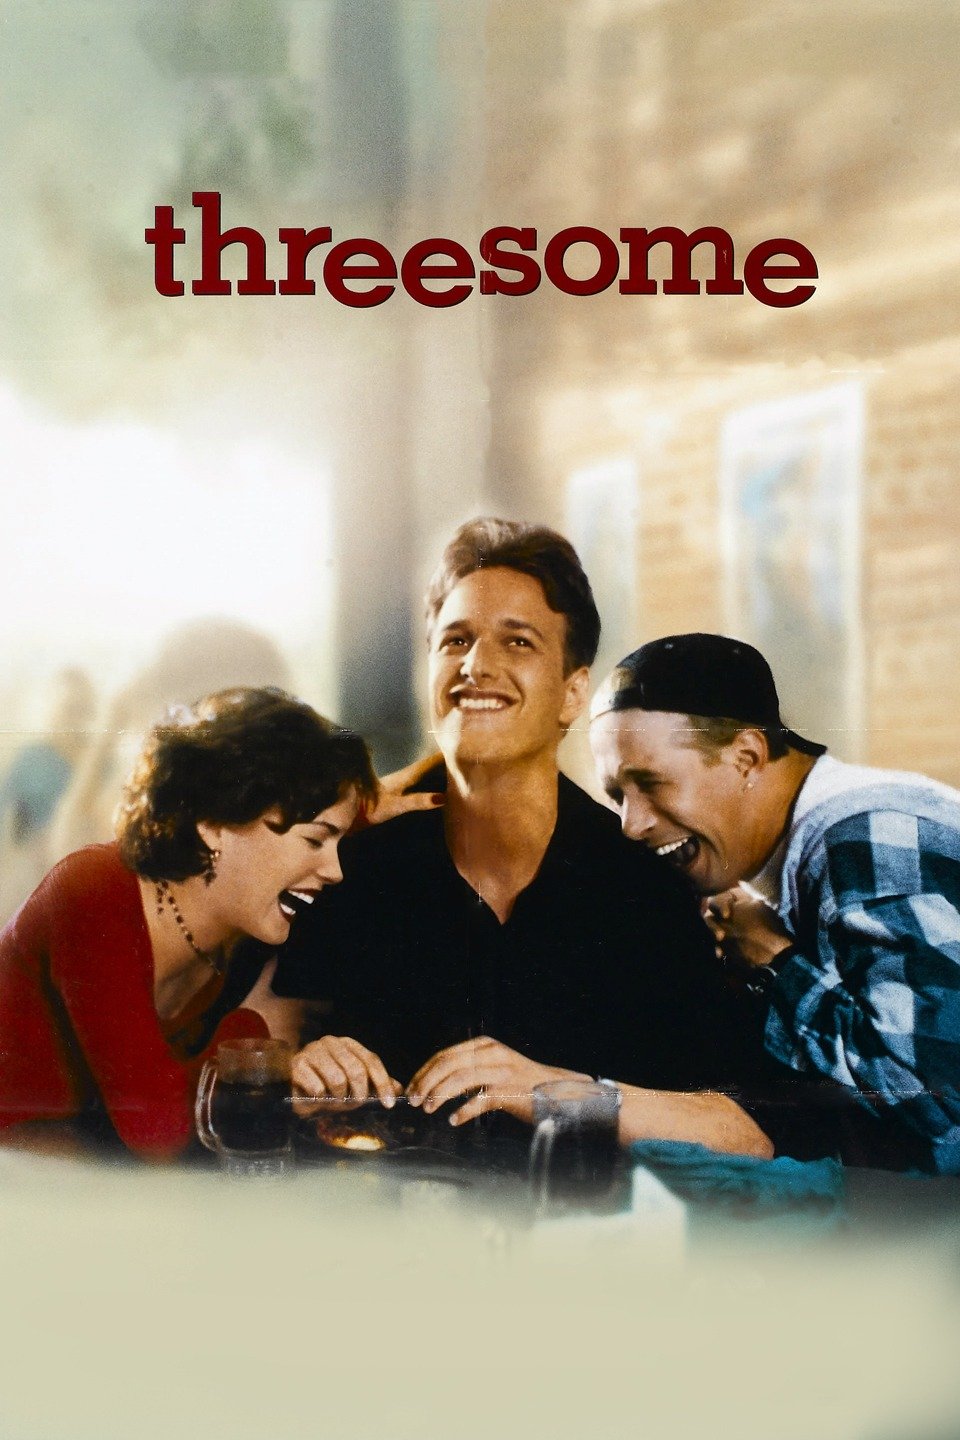 What Is A Threesome